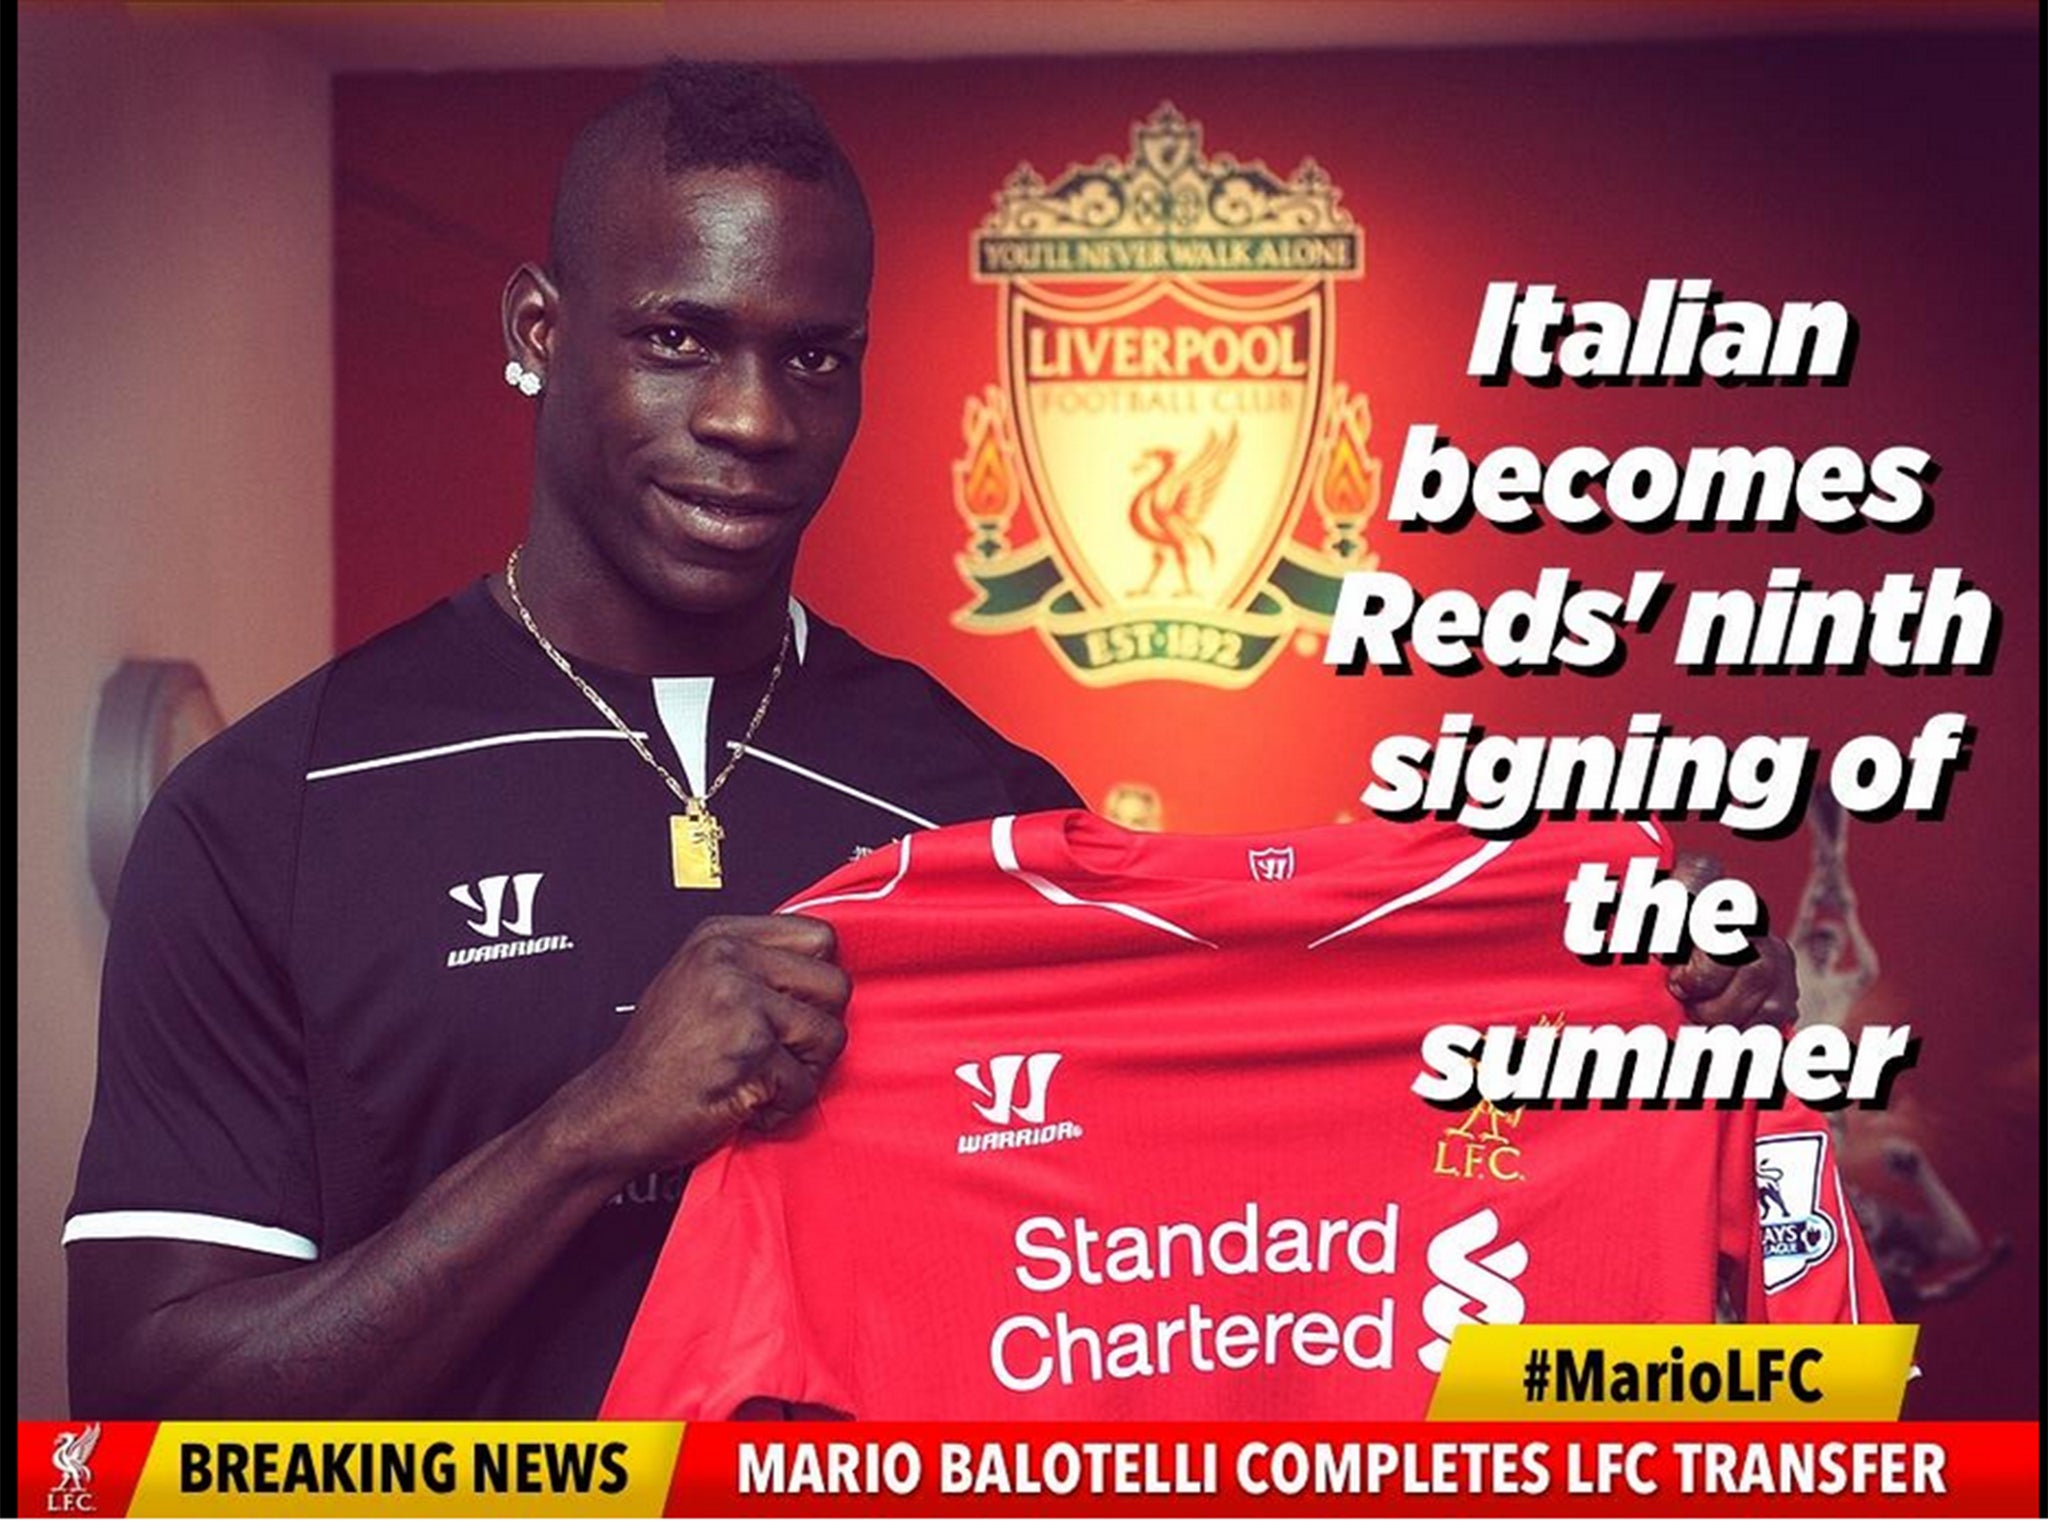 Liverpool confirm the Balotelli transfer on Twitter